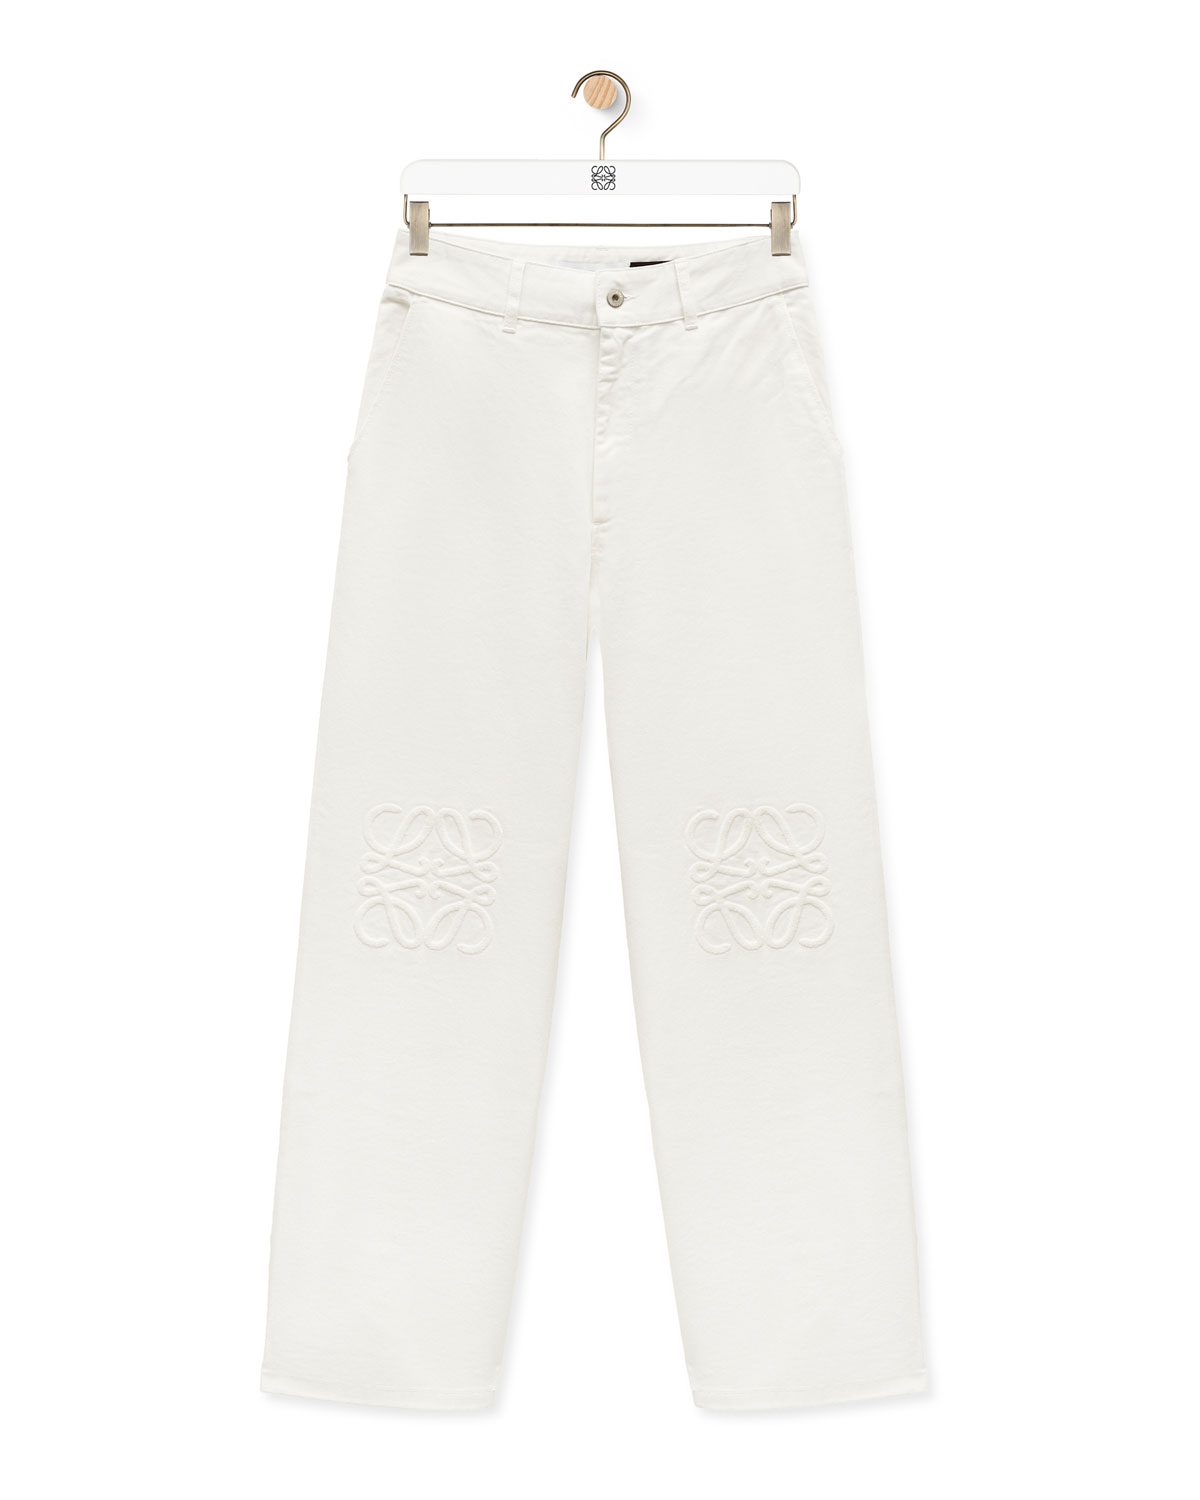 loewe Anagram baggy jeans in cotton